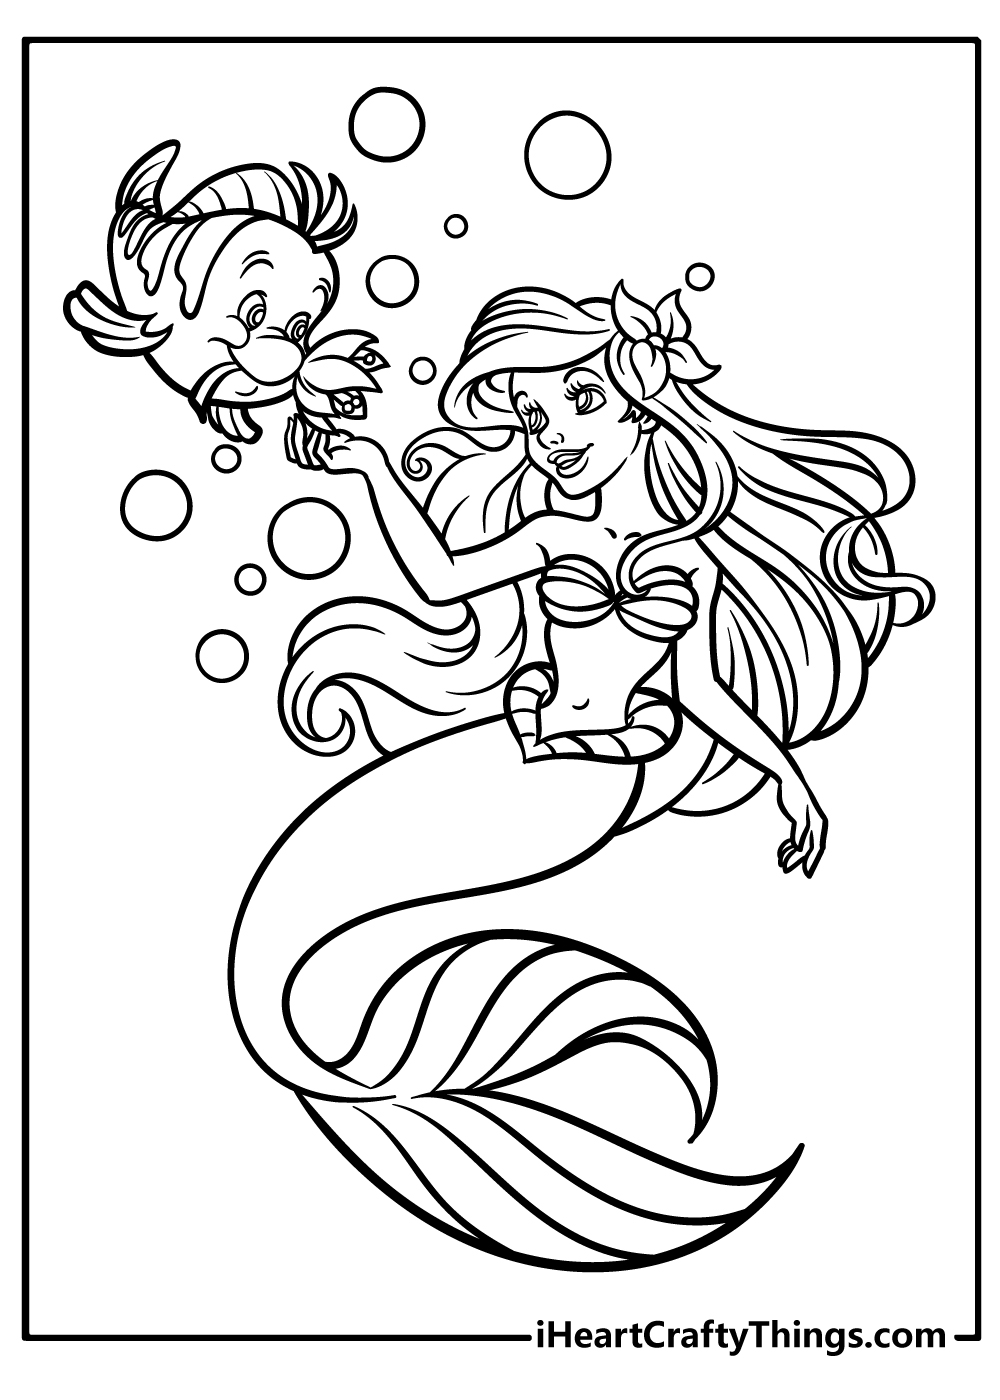 Ariel coloring pages free printables